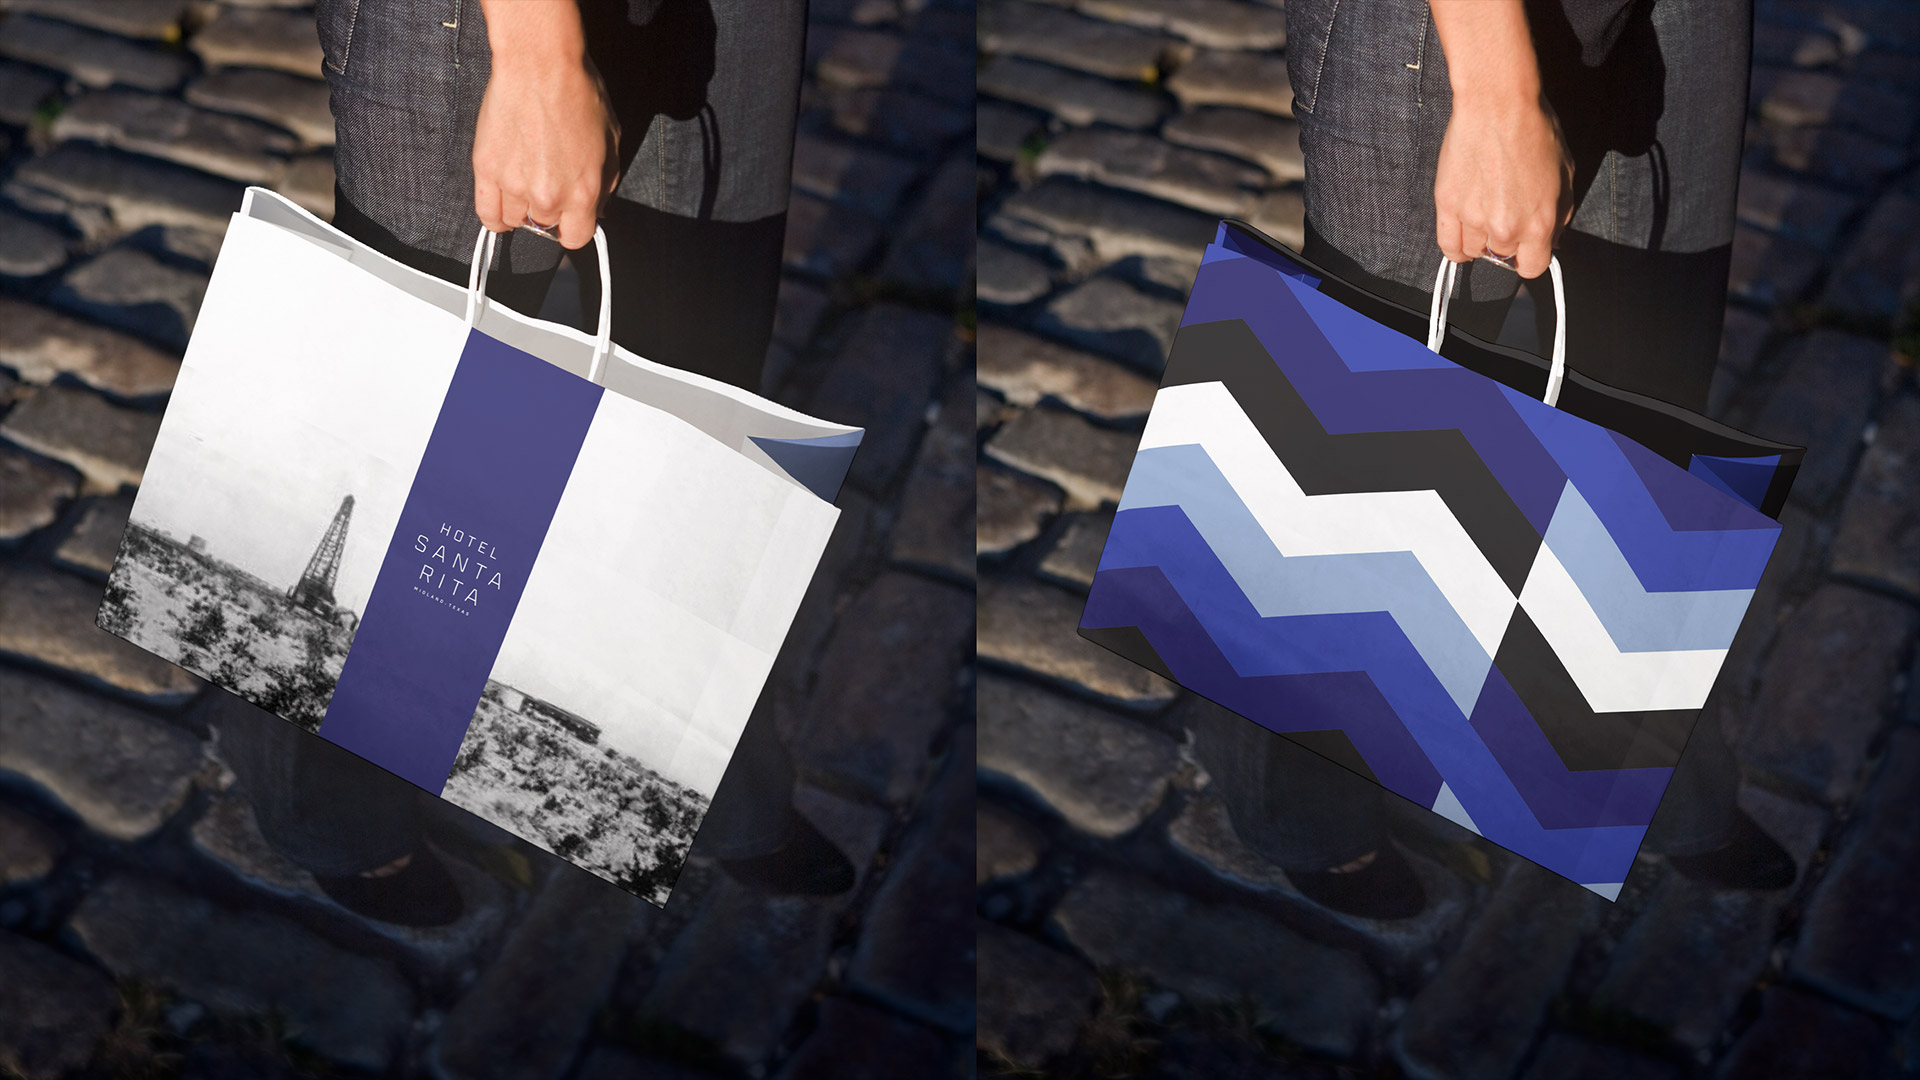 Hotel Santa Rita logo on a shopping bag with a blue and black chevron pattern and a picture of Midland with an oil rig.